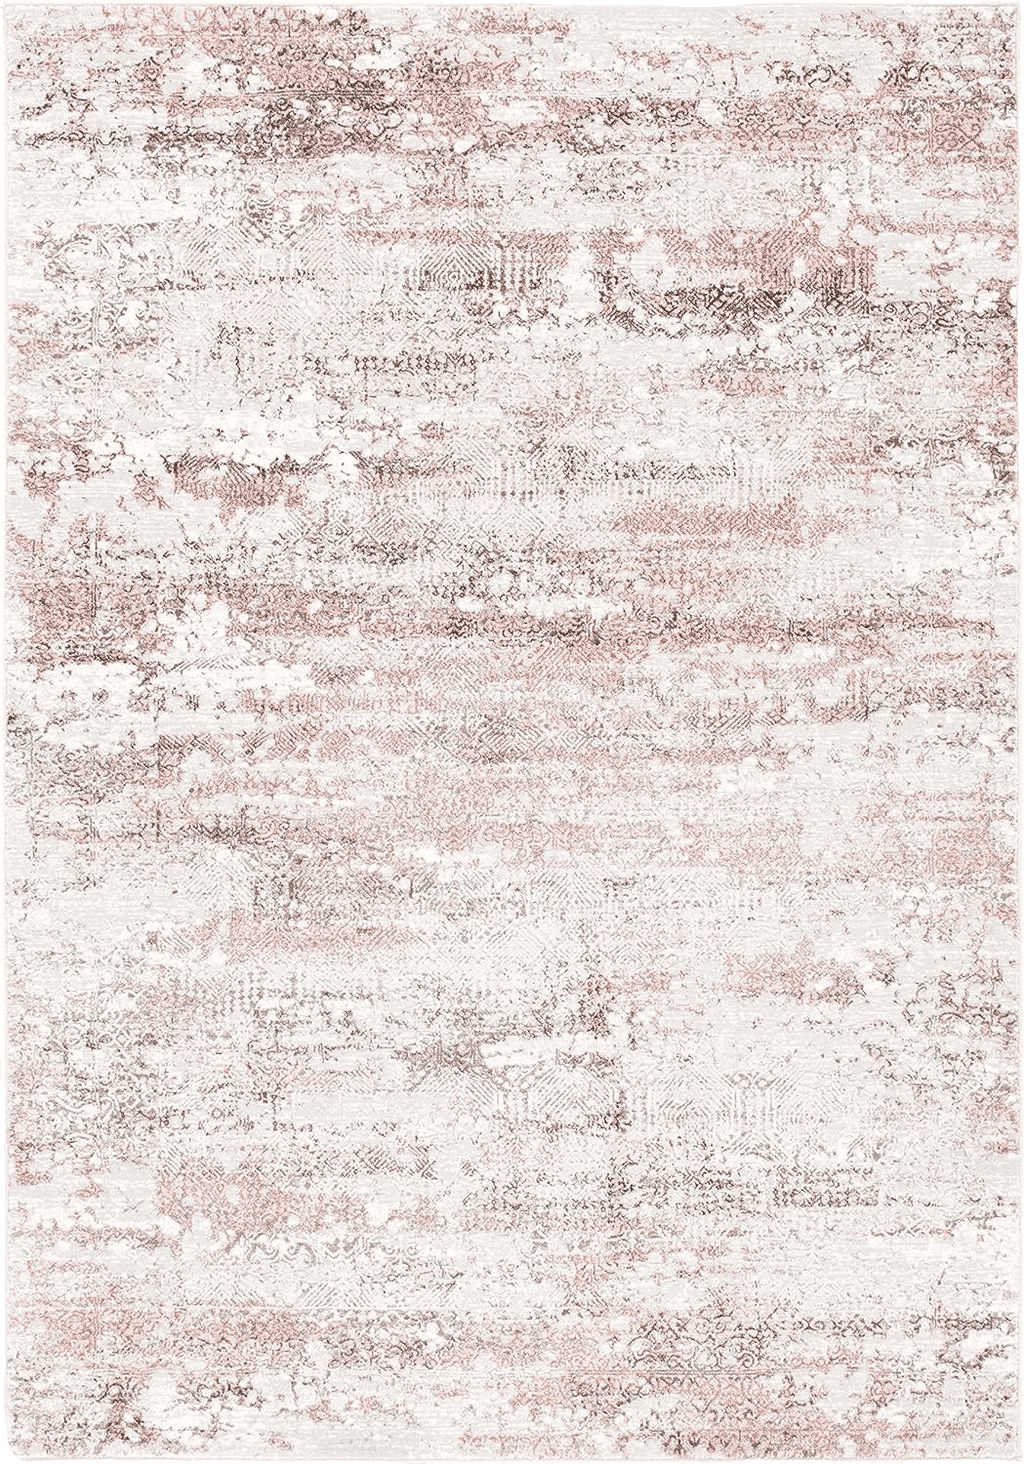 Area White SAFAVIEH Meadow Collection Area Rug - 9' x 12', Beige & Pink, Modern Abstract Design, Non-Shedding & Easy Care, Ideal for High Traffic Areas in Living Room, Bedroom (MDW585B)